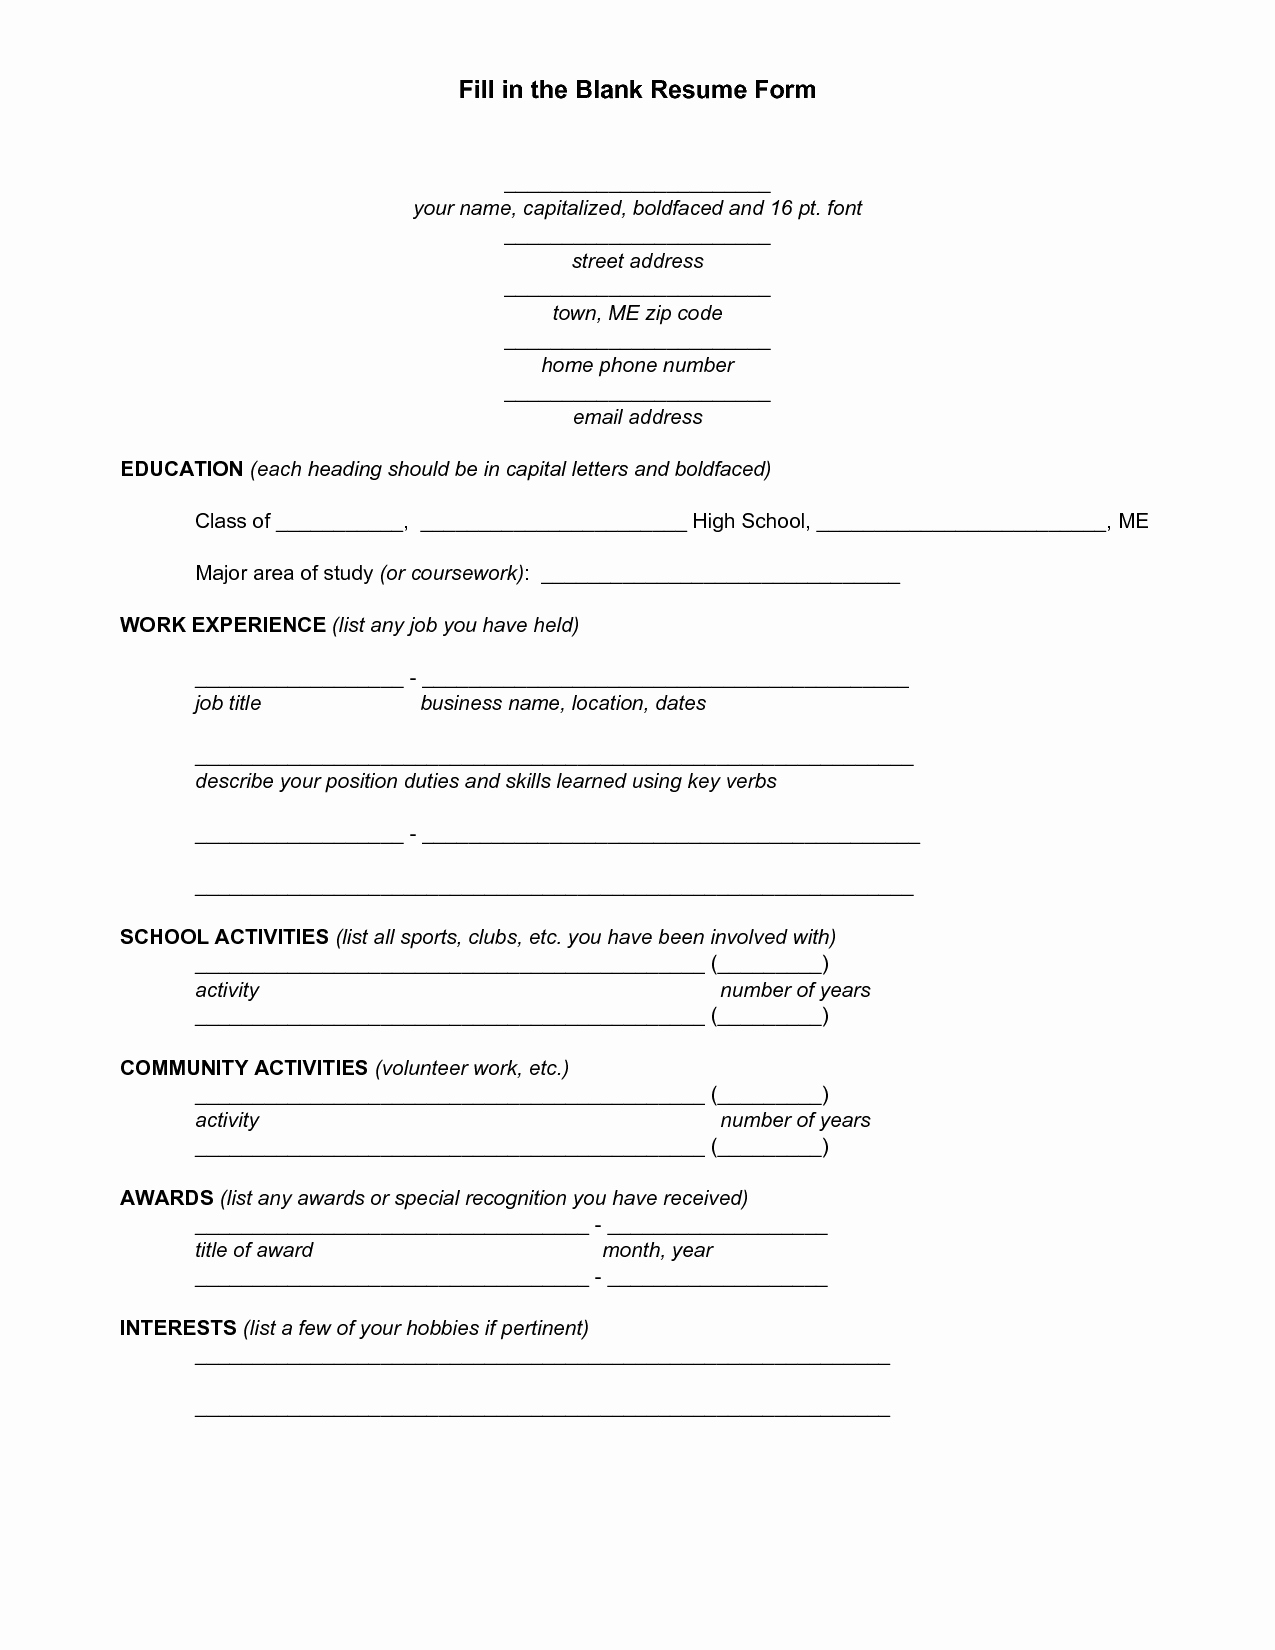 Fill In the Blank Resume New Blank Resume Template for High School Students